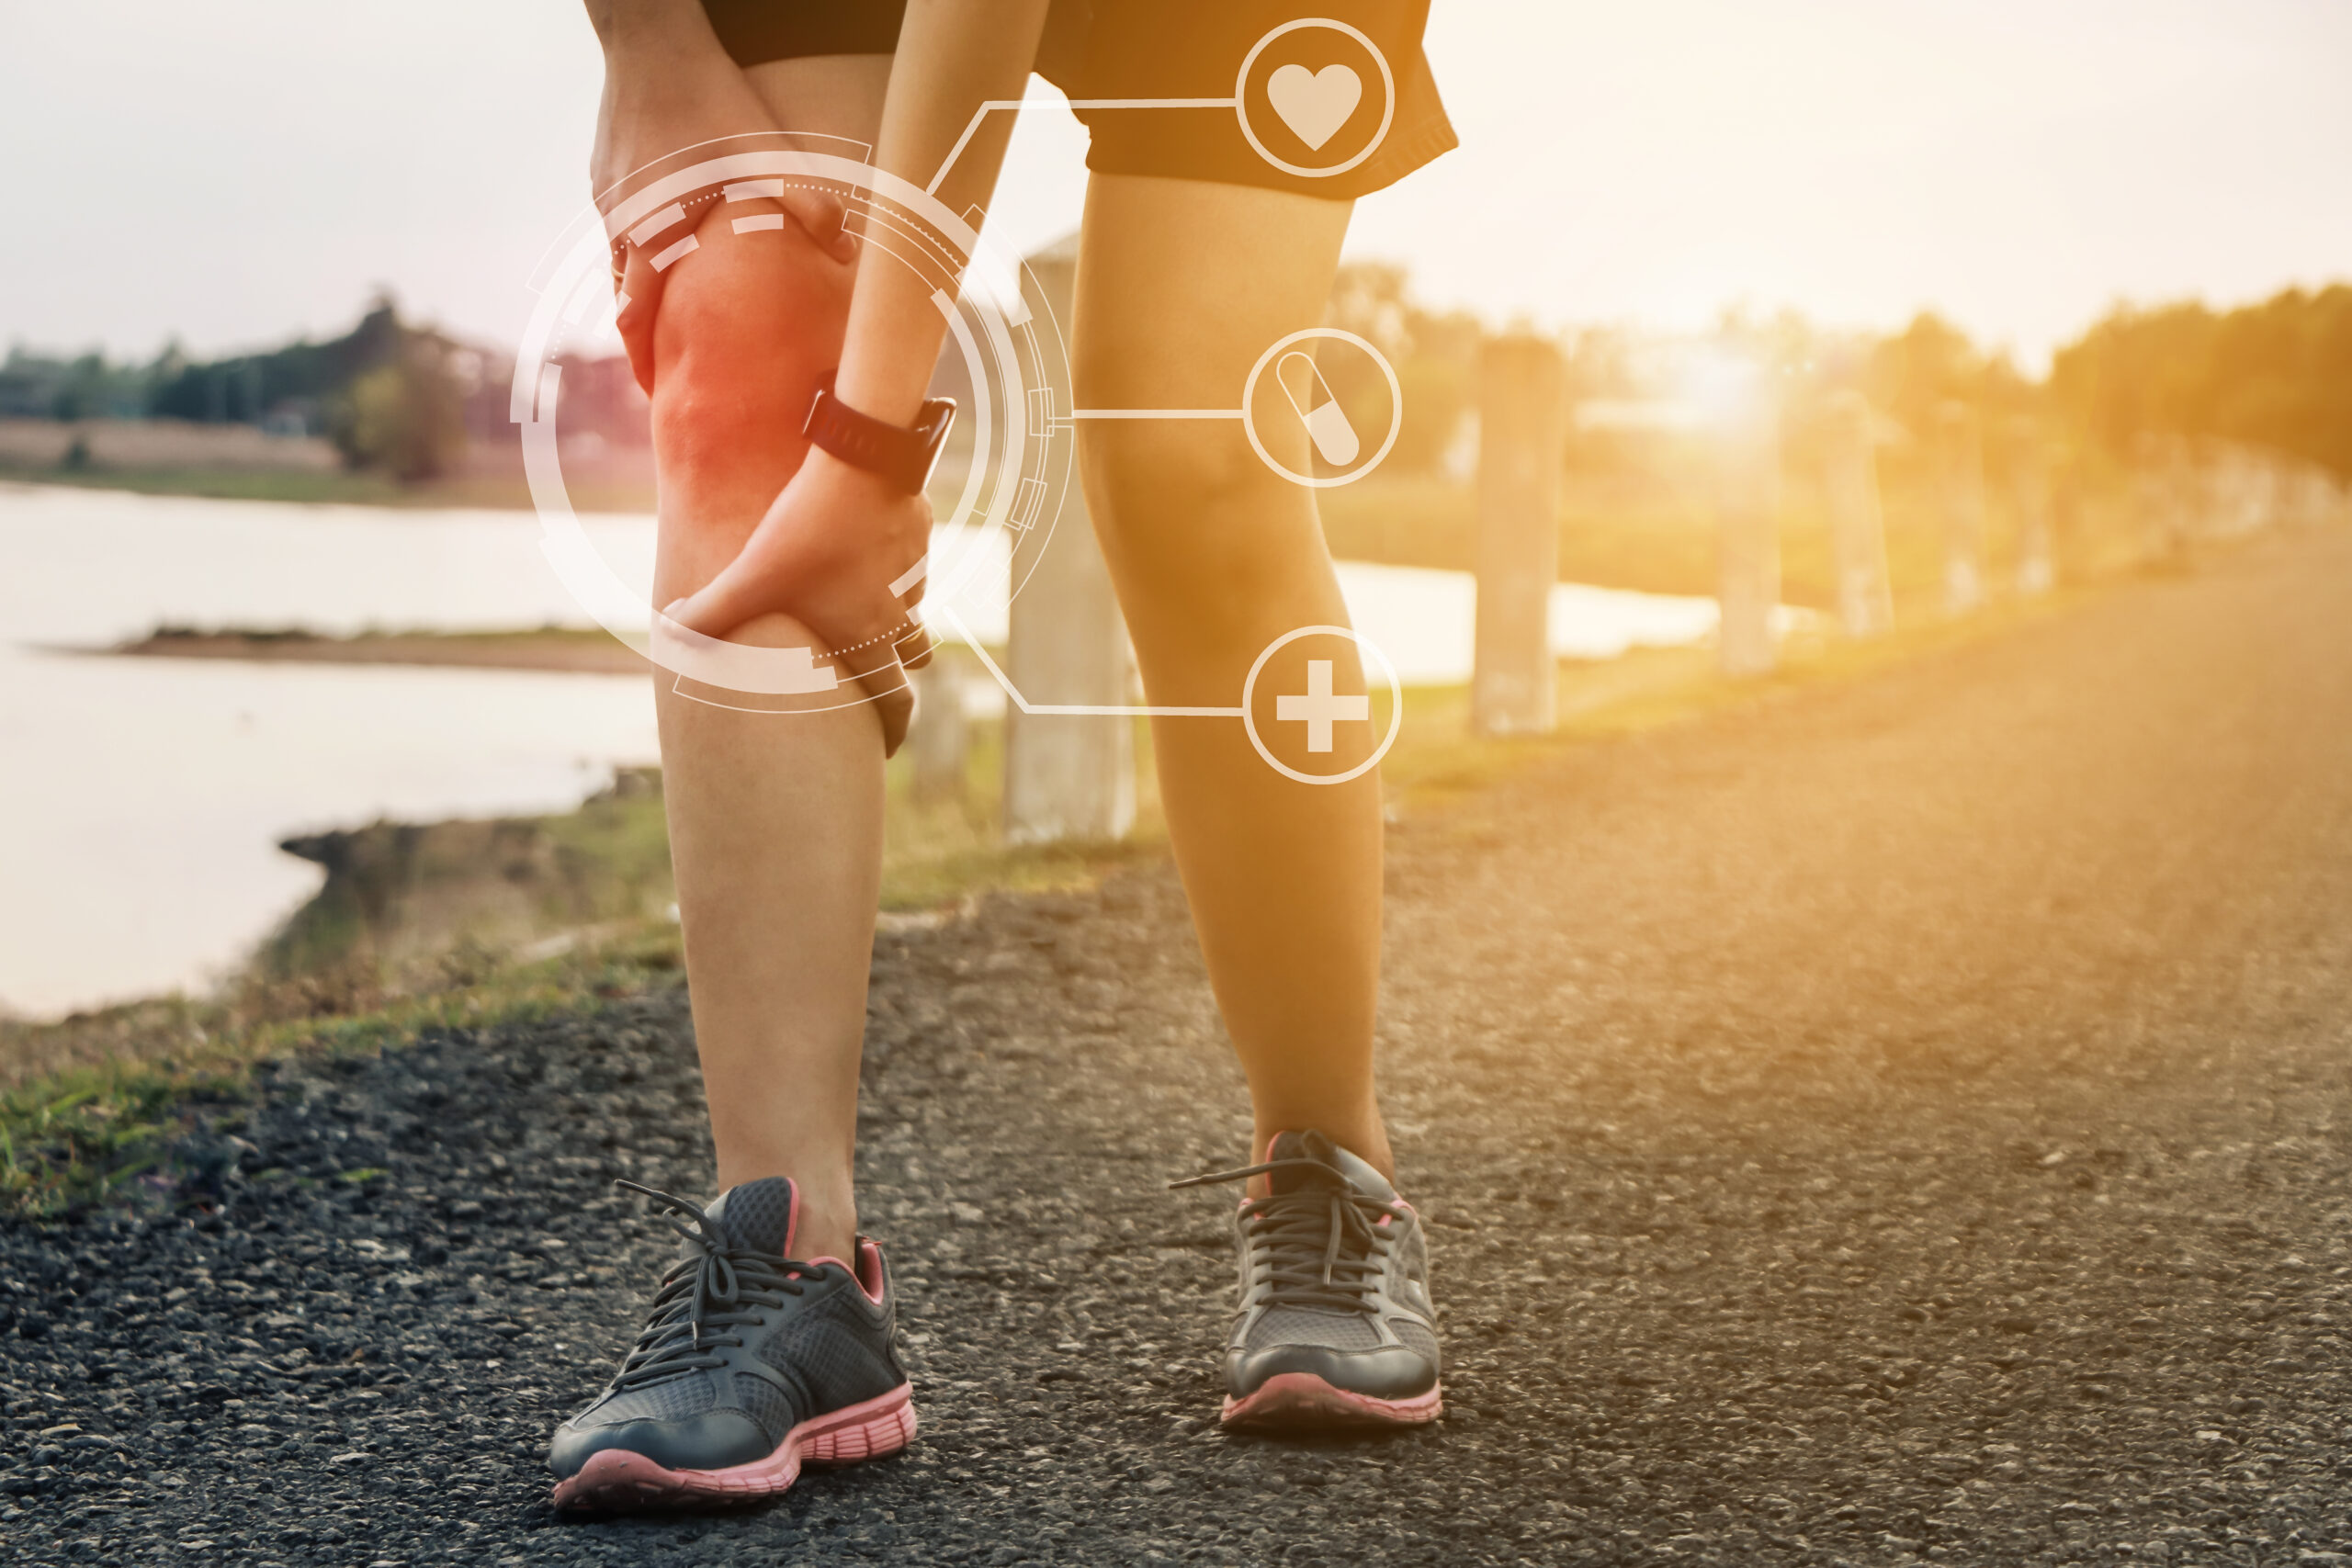 Prevent Orthopedic and Sports Injuries This Summer